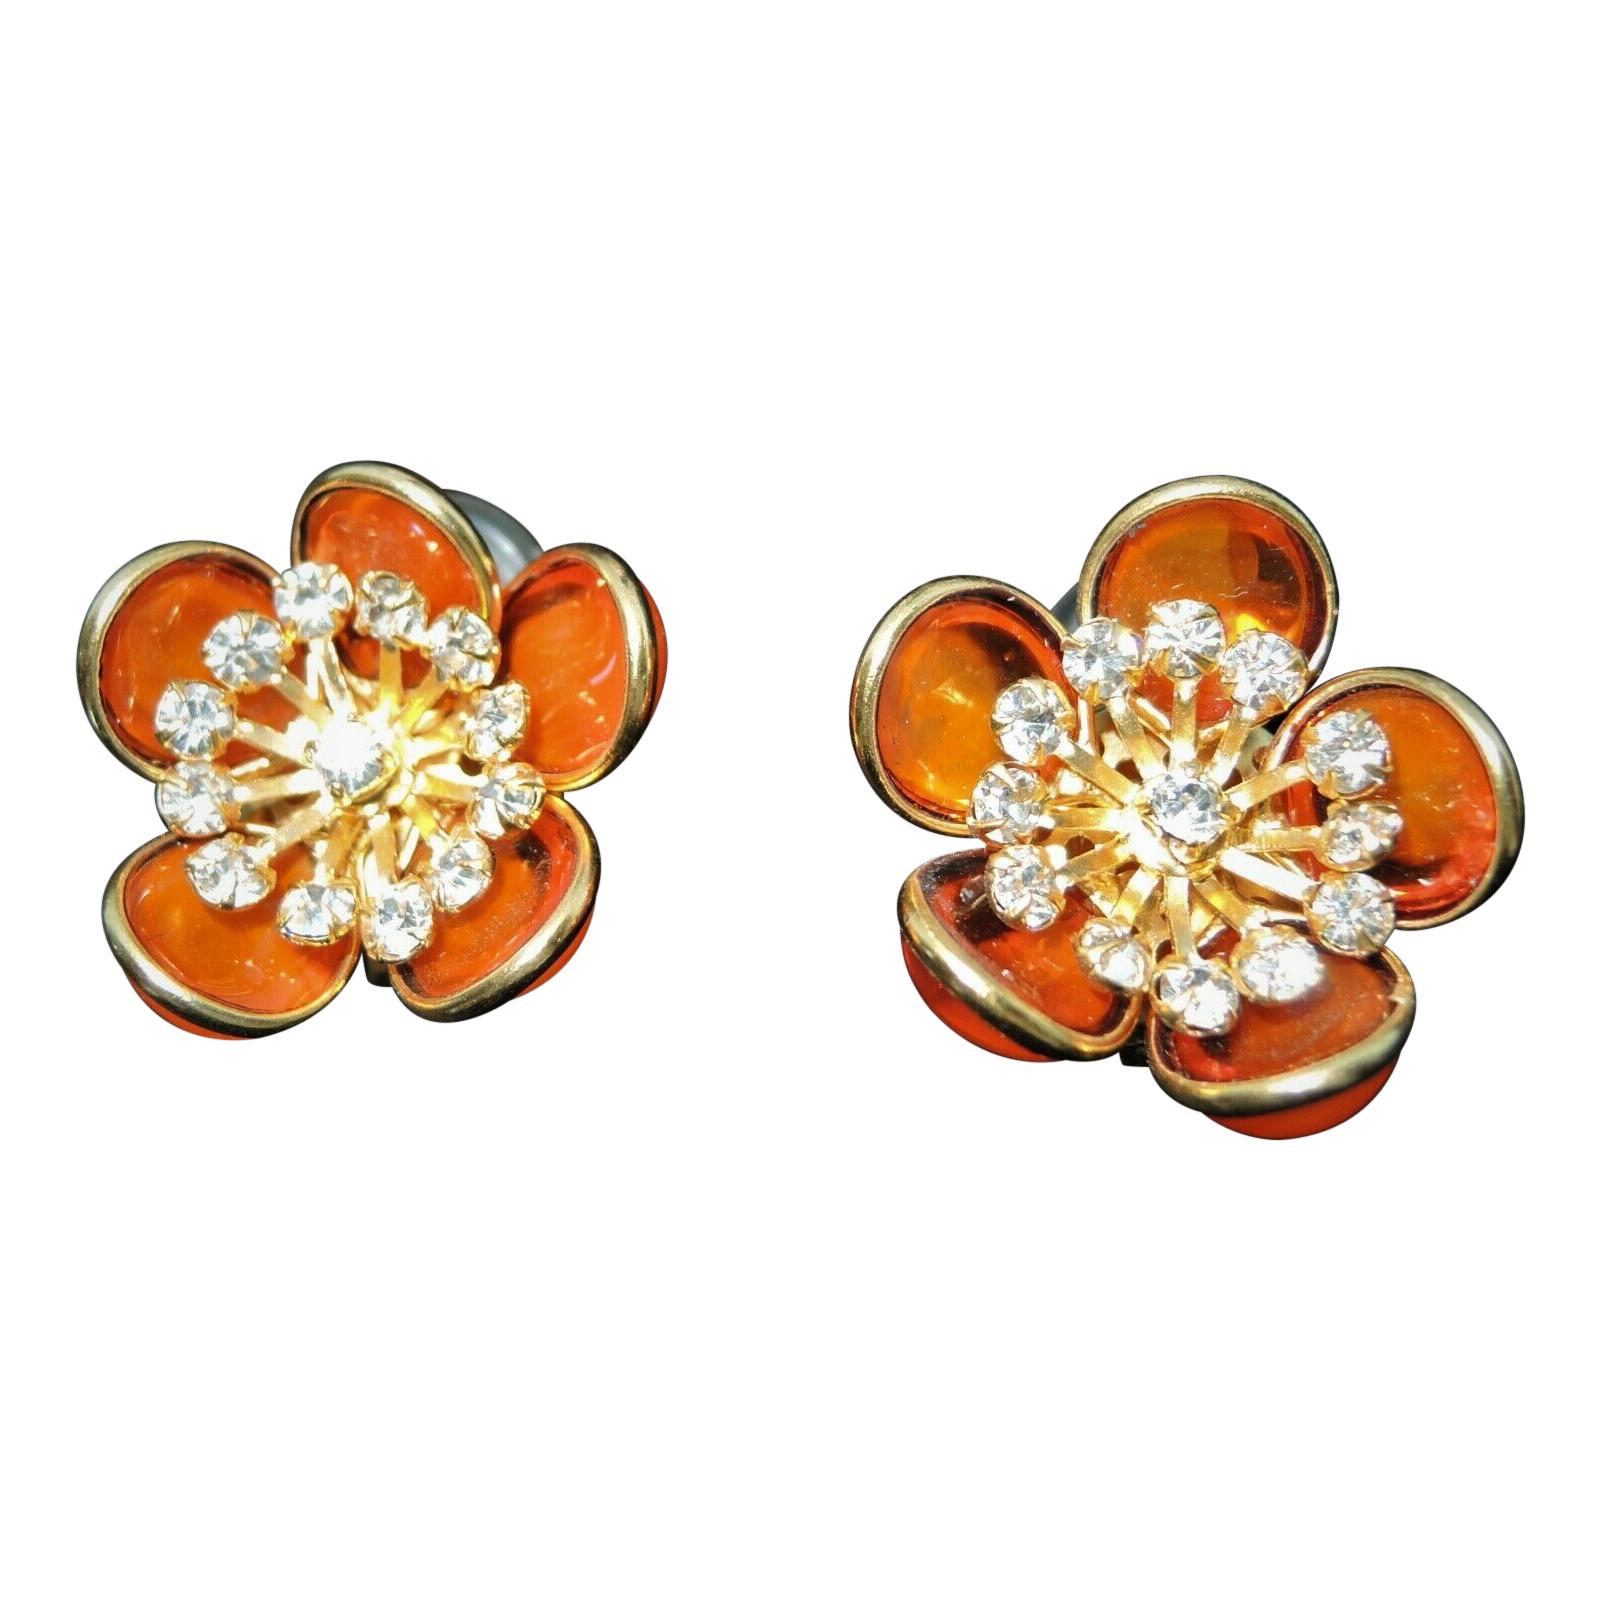 Designer AUGUSTINE Paris by THIERRY GRIPOIX Signed Flower Clip on Earrings For Sale